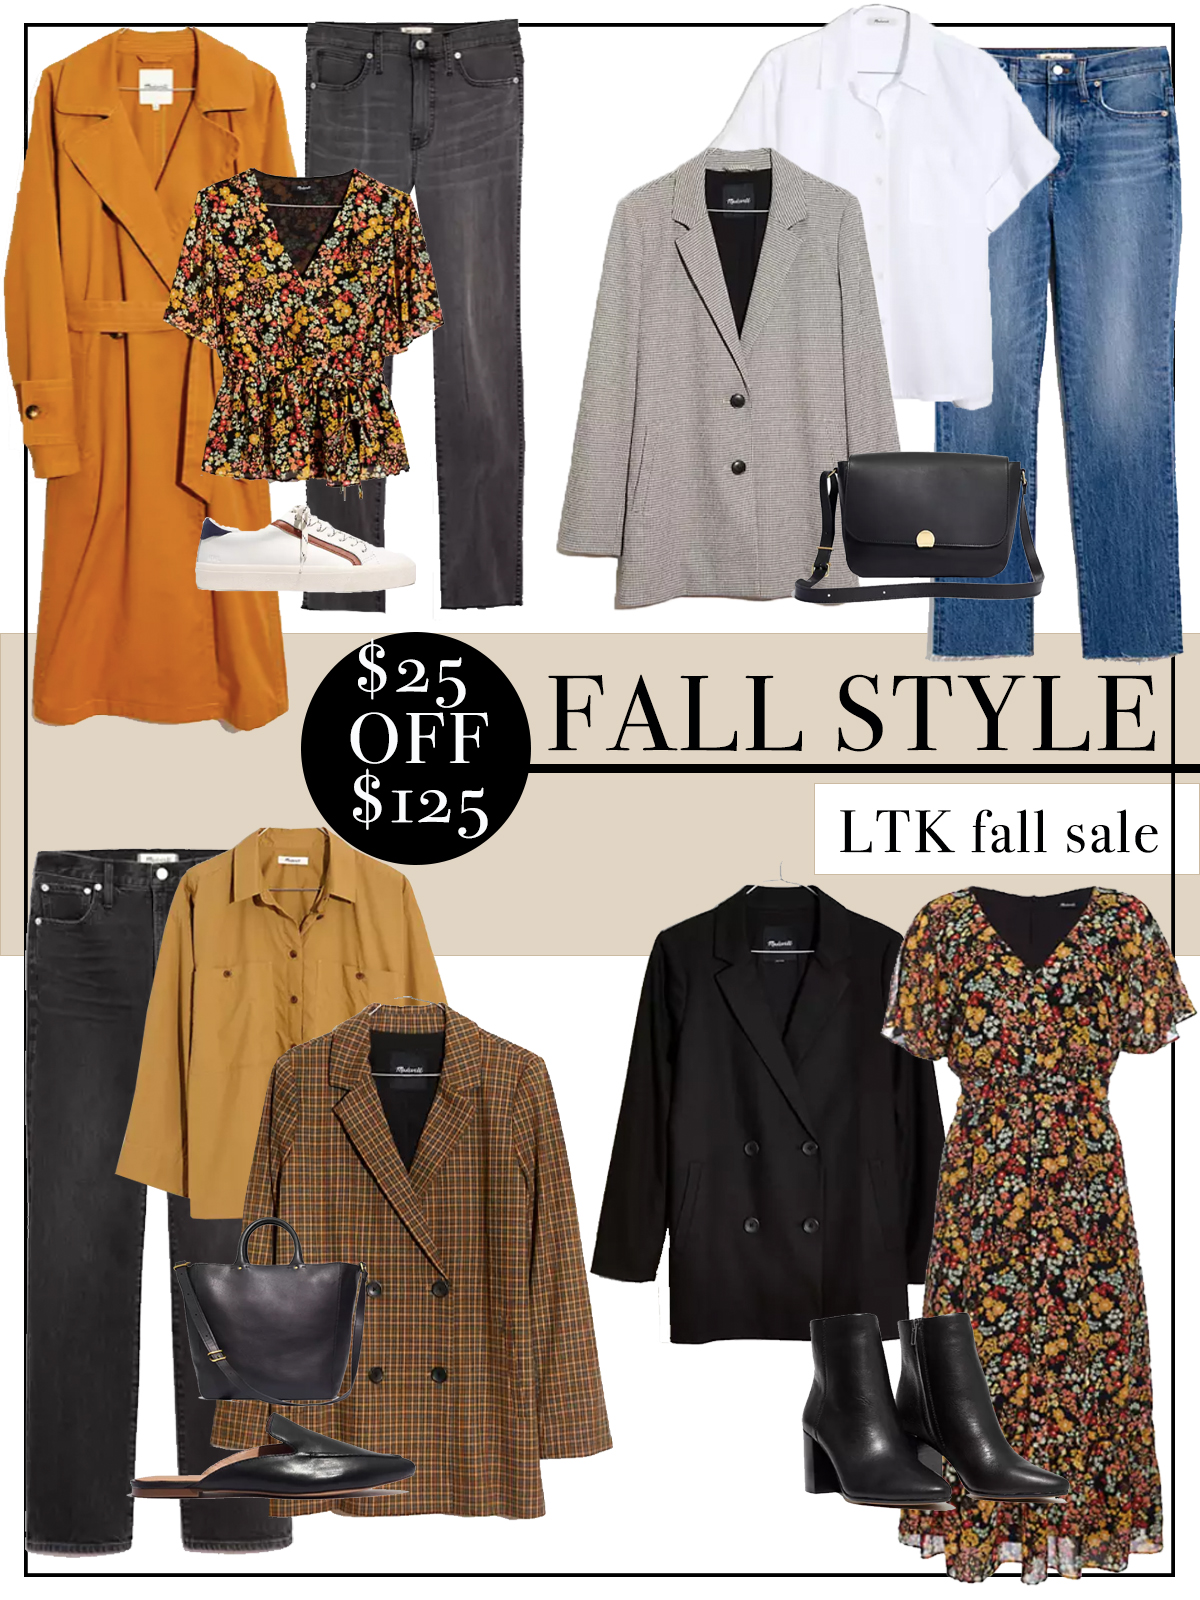 WHAT TO BUY FROM THE LKT FALL SALE | CHIC TALK | CHIC TALK